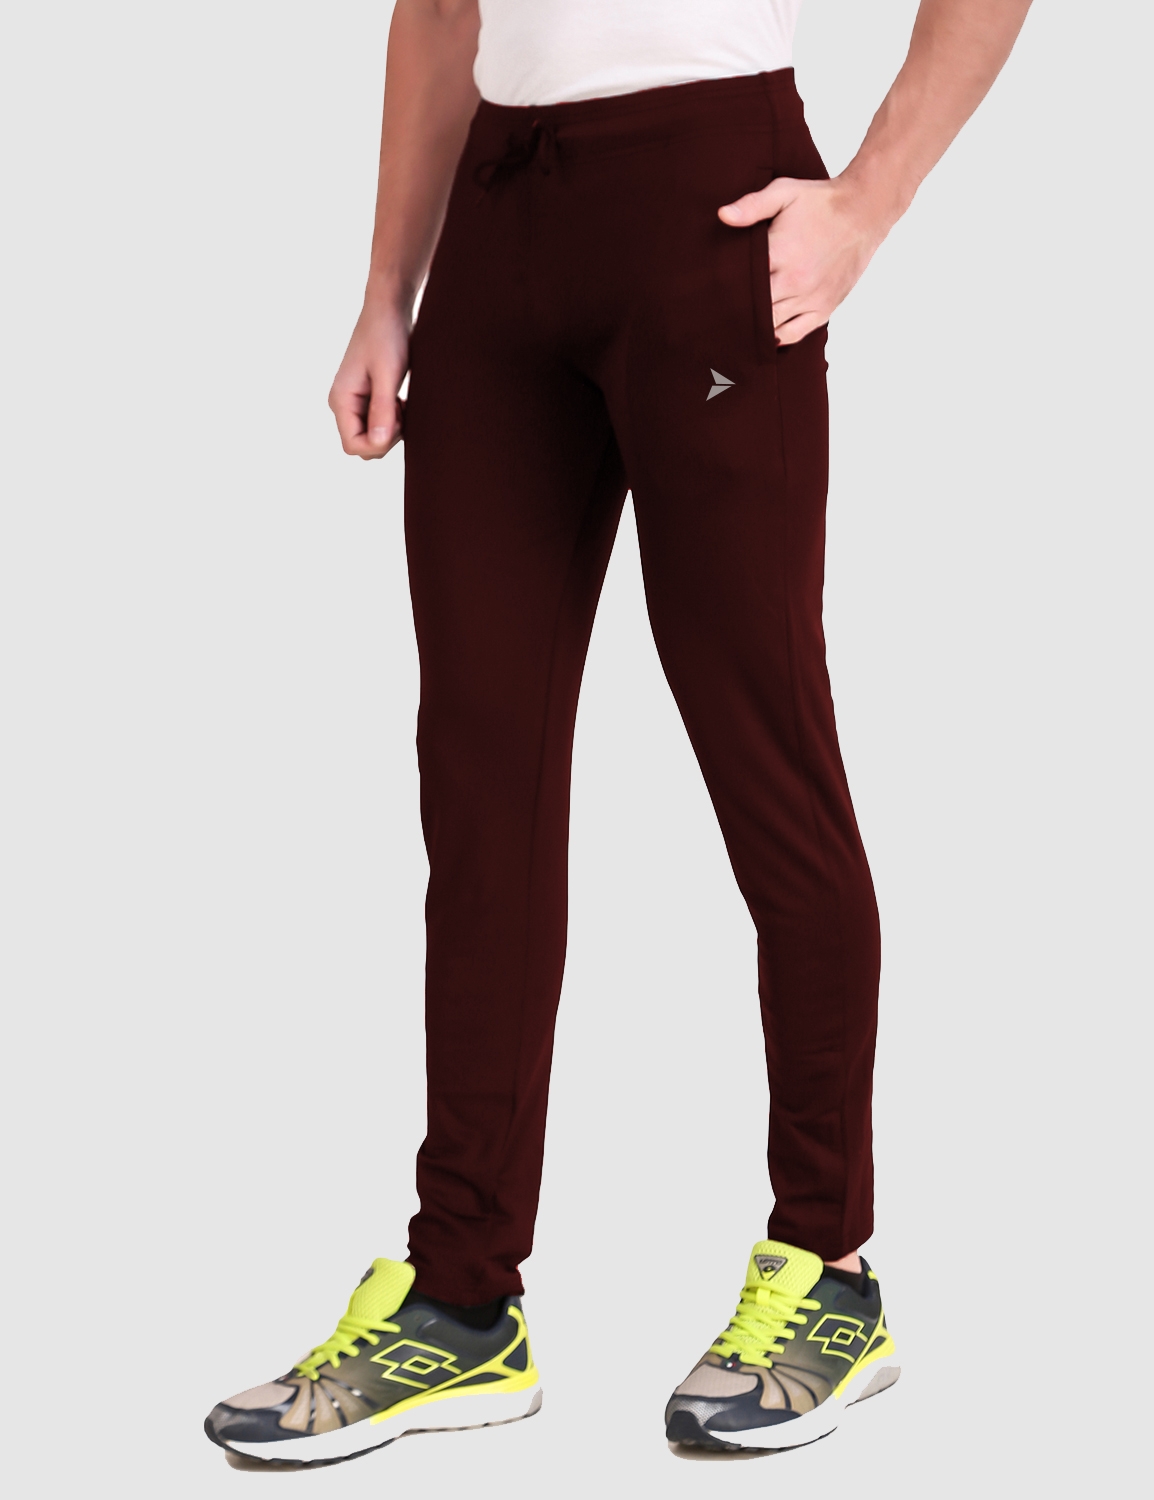 Fitinc Slim Fit Maroon Track Pant for Workout